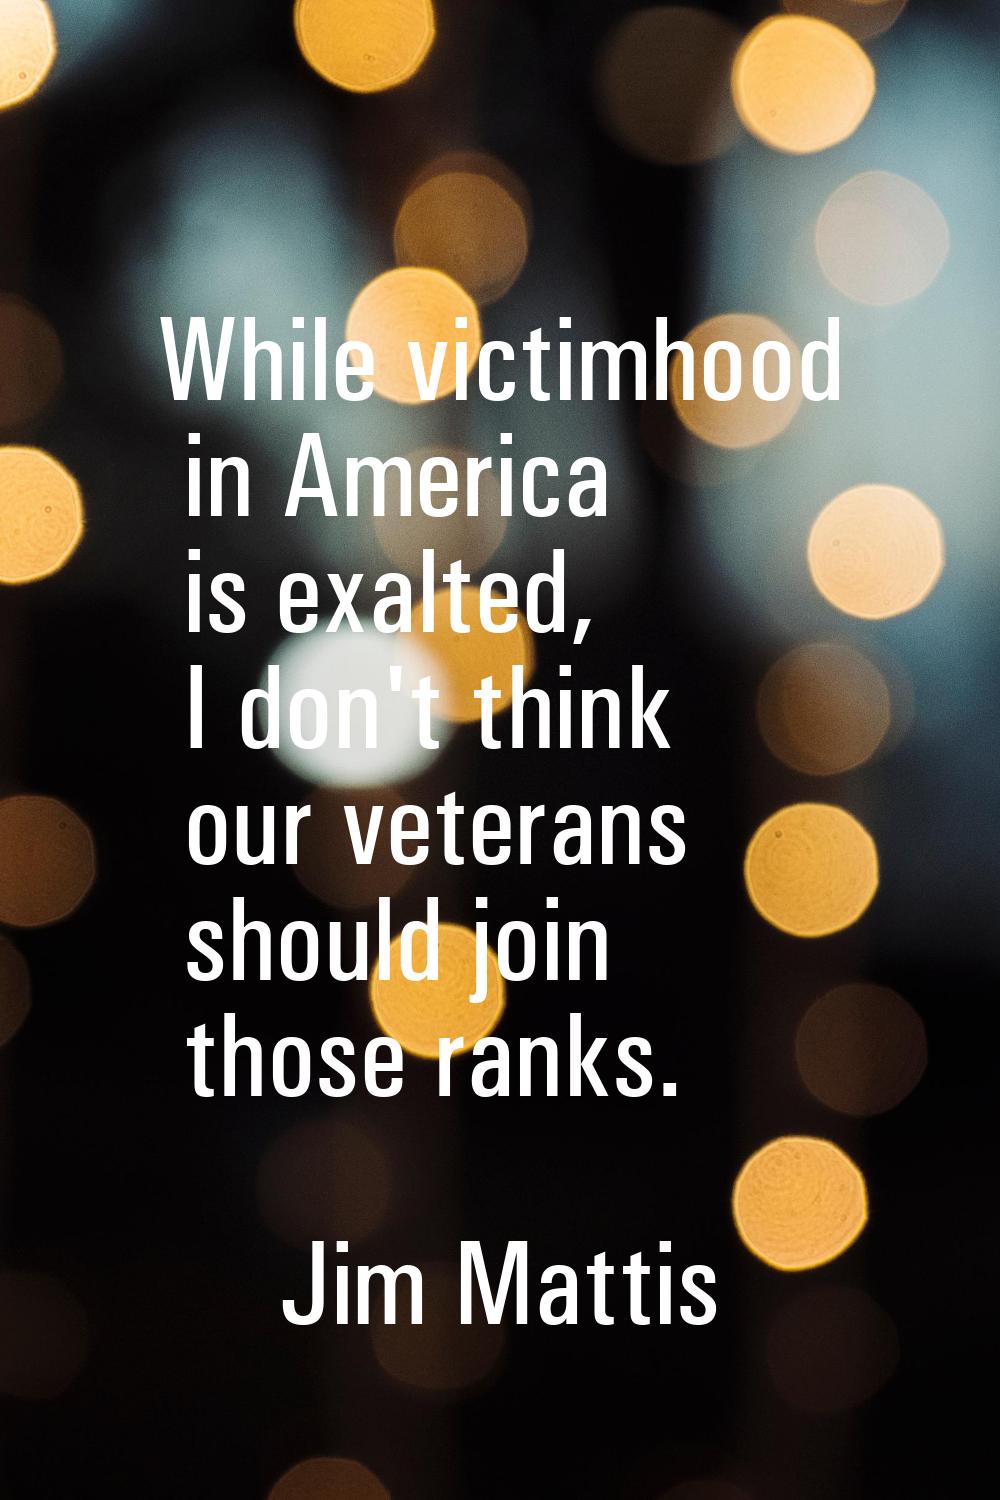 While victimhood in America is exalted, I don't think our veterans should join those ranks.